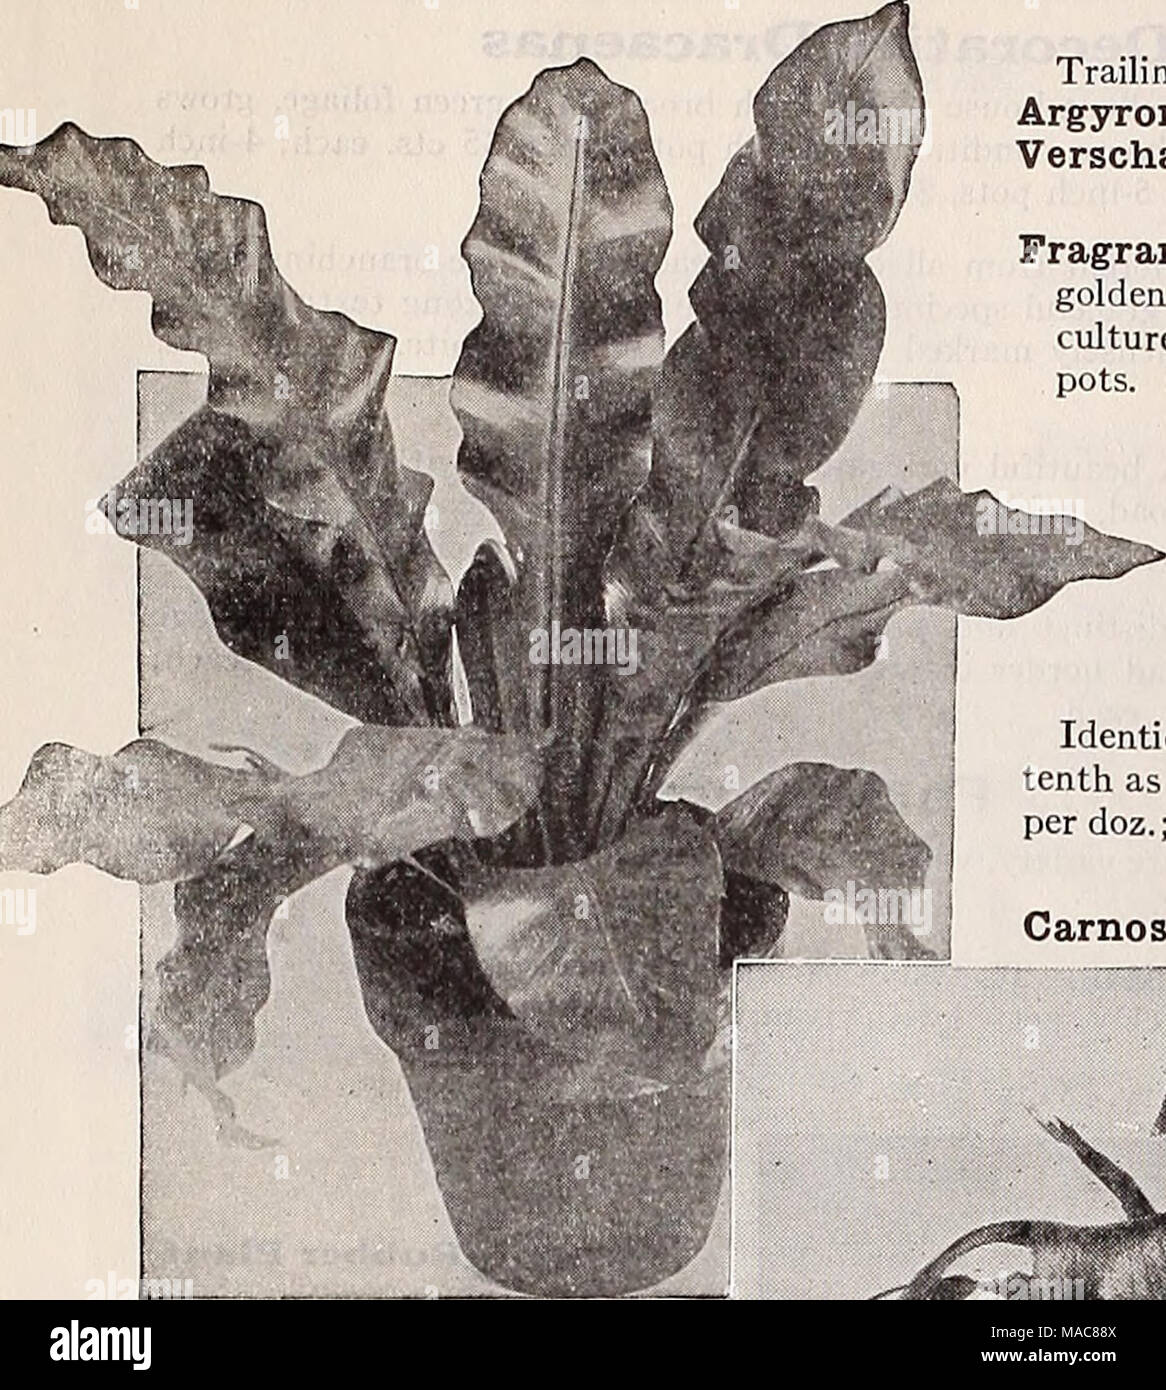 . Dreer's midsummer list 1932 . Platycerium Alcicorne Major Asplenium Nidus Avis Fine Ferns Adiantum Farleyense Glor- iosa (The Glory Fern). An easy-growing form of that most beautiful of all Maiden Hairs, Adiantum Farleyense. Good plants, in 3-inch pots, SO cts. each; 4-inch pots, $1.00 each. — Wrighti. A comparatively new variety of the Maiden Hair type with large fronds which are of a particularly rich pleasing green color. A good hardy variety suitable for the house. 4-inch pots, 75 cts. each. Asplenium Nidus Avis {Bird's Nest Fern). We have a splendid lot of this interesting Fern which is Stock Photo